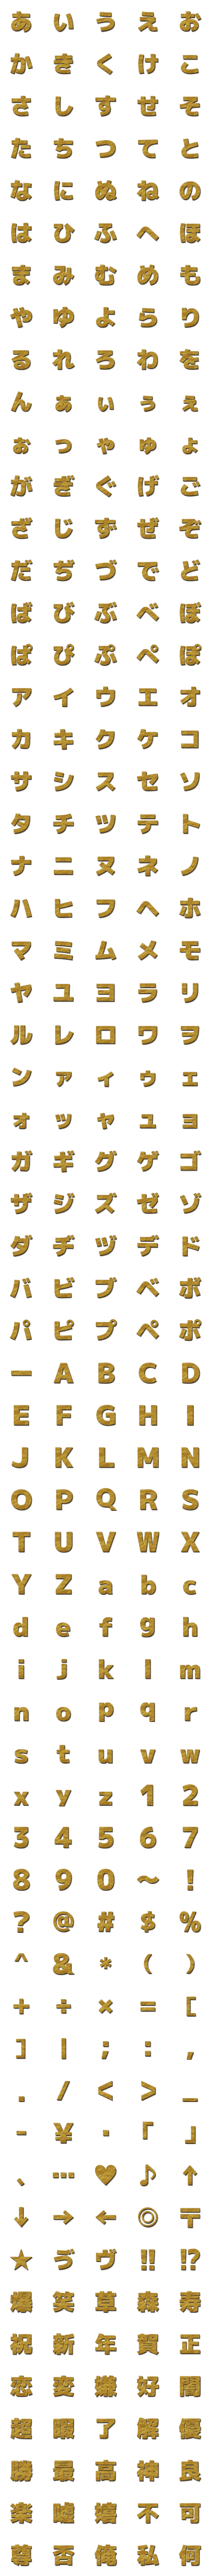 [LINE絵文字]段ボール デコ文字 -ゴシック体-の画像一覧